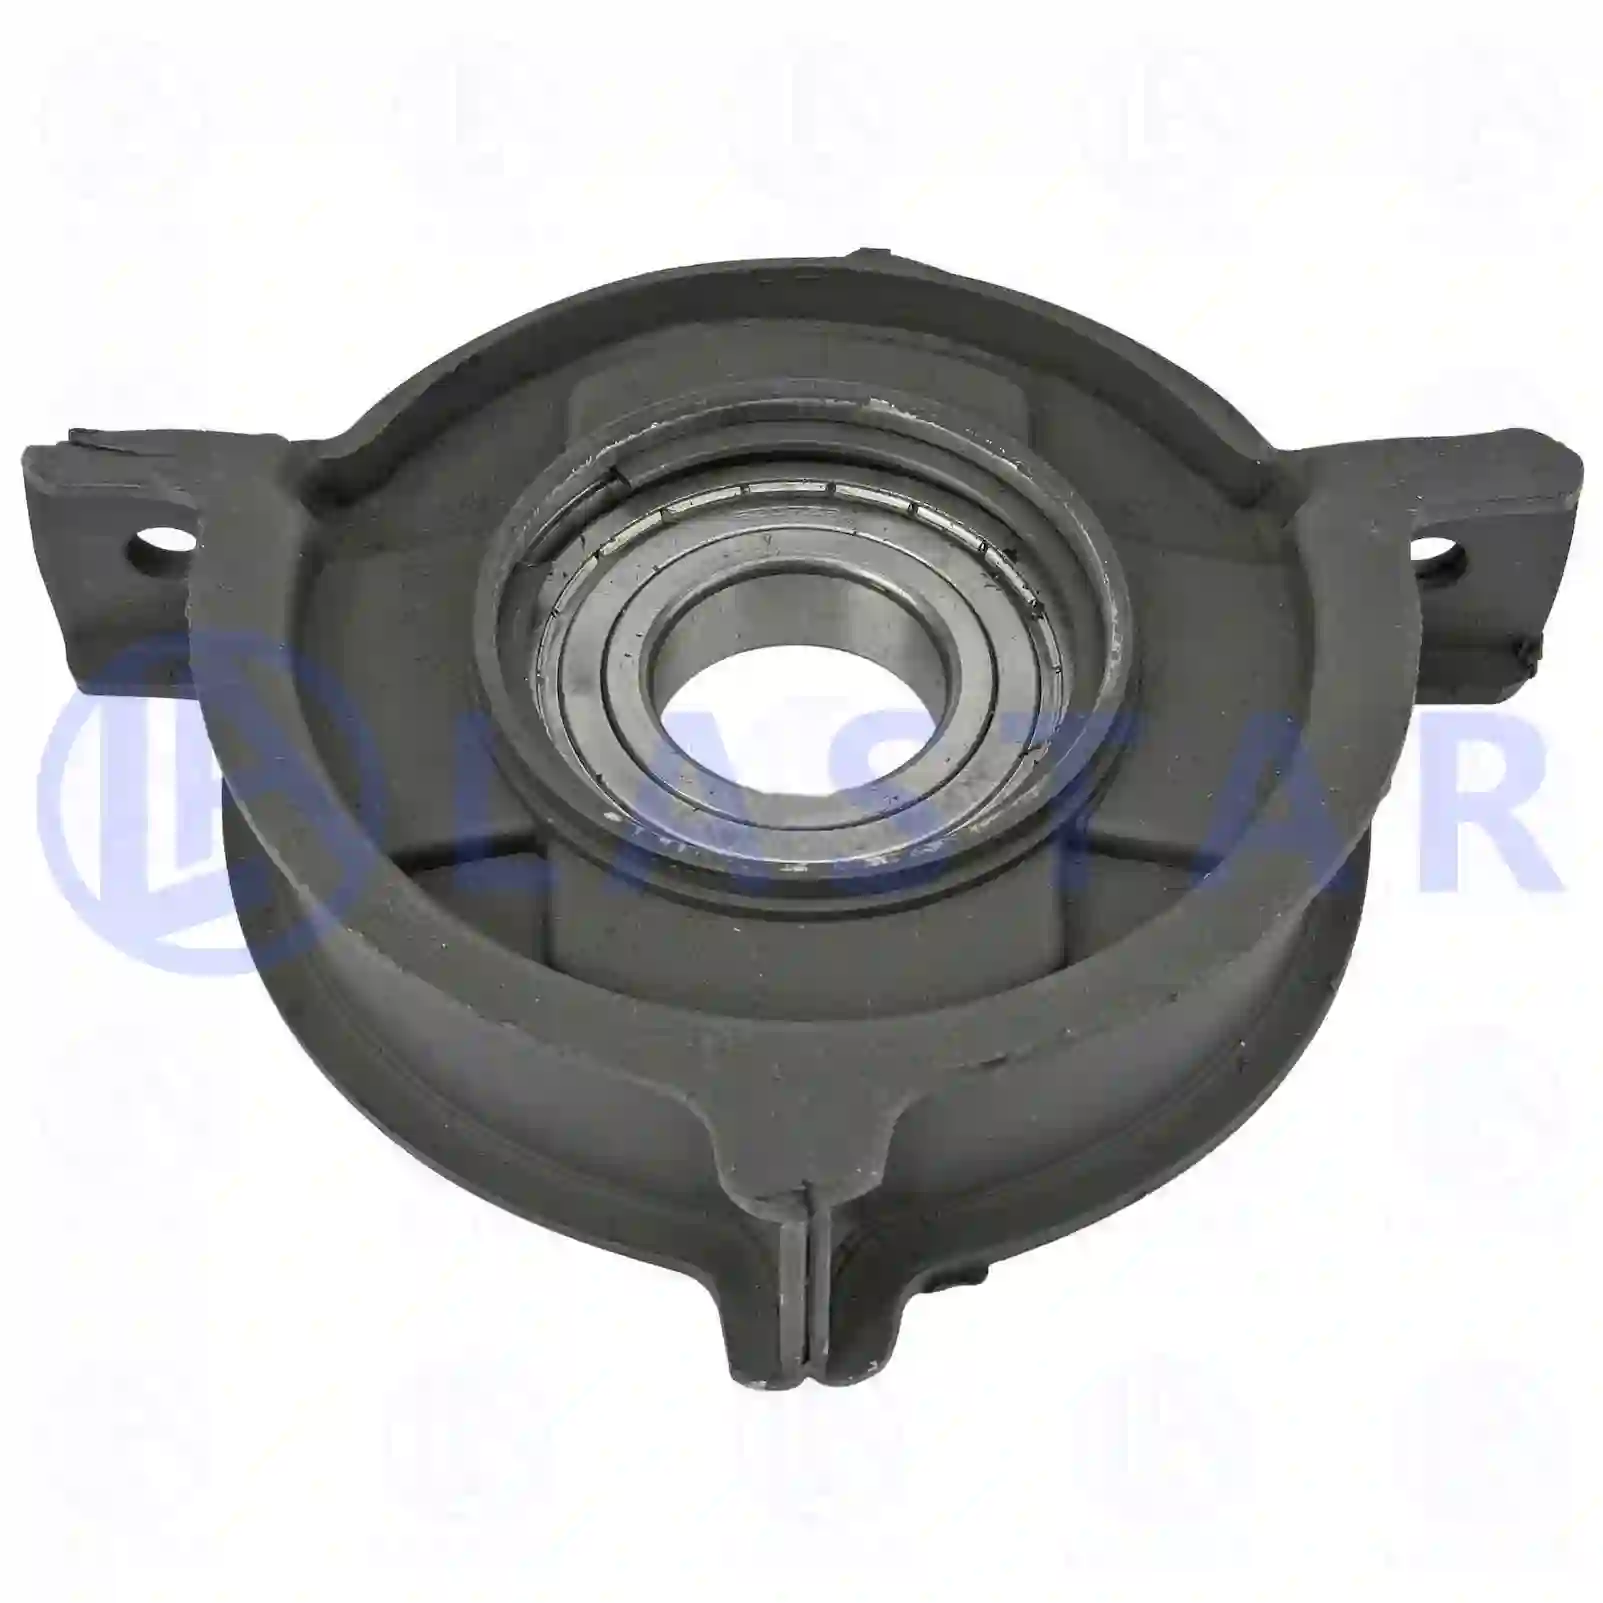 Center bearing, 77734258, 3094100110, 3095860141, 3104100622, 3104100822, 3104100922 ||  77734258 Lastar Spare Part | Truck Spare Parts, Auotomotive Spare Parts Center bearing, 77734258, 3094100110, 3095860141, 3104100622, 3104100822, 3104100922 ||  77734258 Lastar Spare Part | Truck Spare Parts, Auotomotive Spare Parts